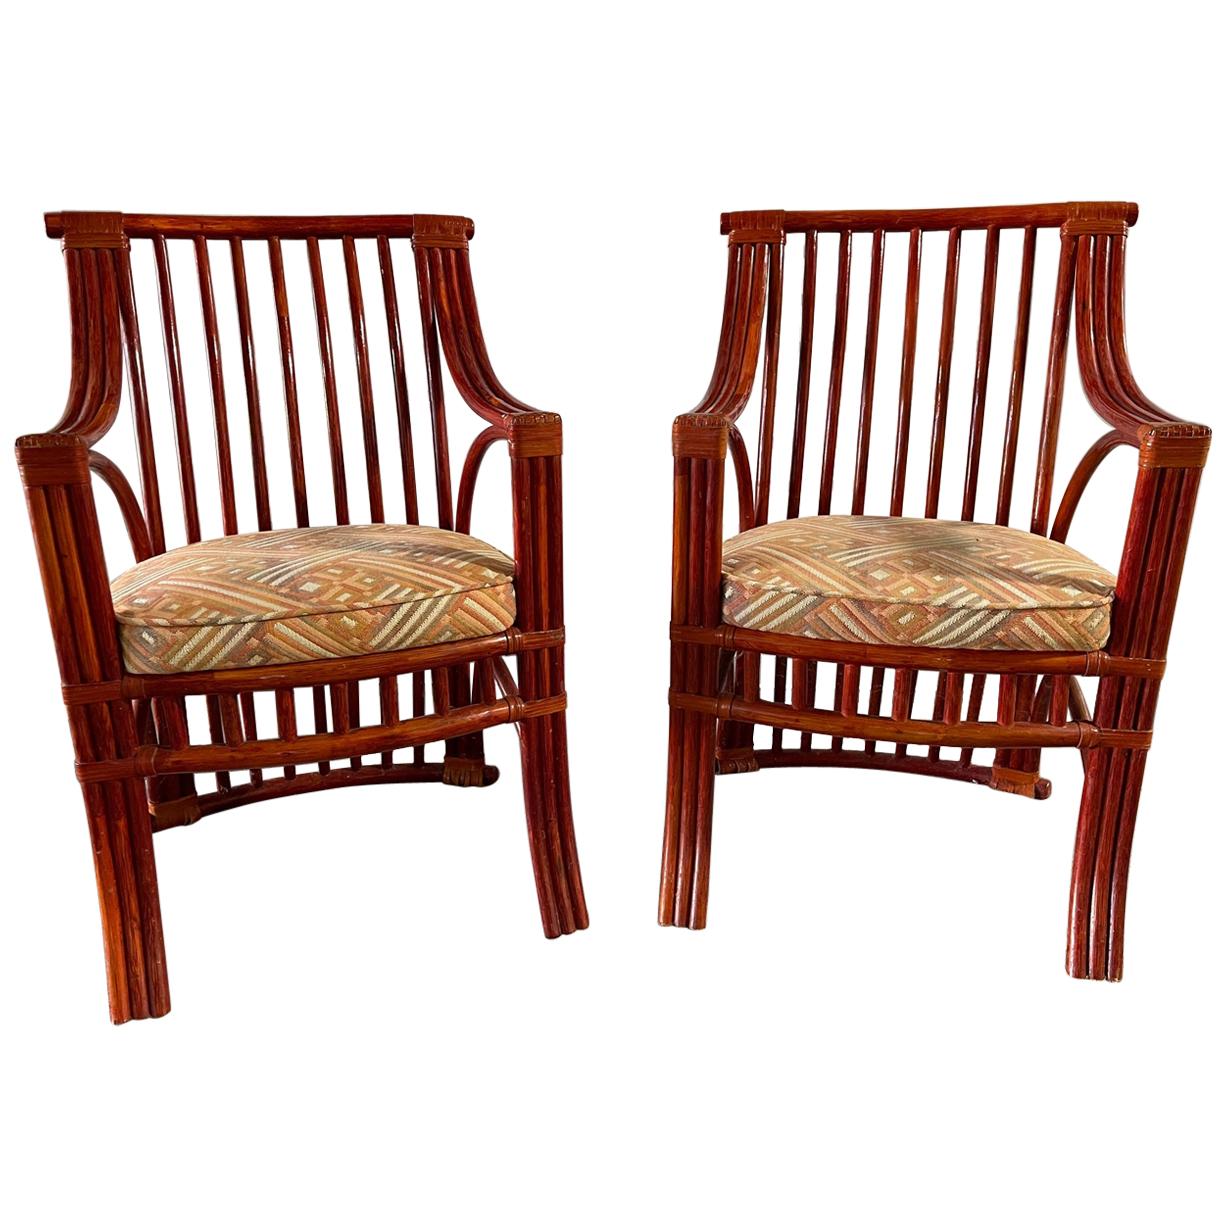 Pair of Chinese Style Red Lacquer Rattan Chairs Attributed to Roche Bobois